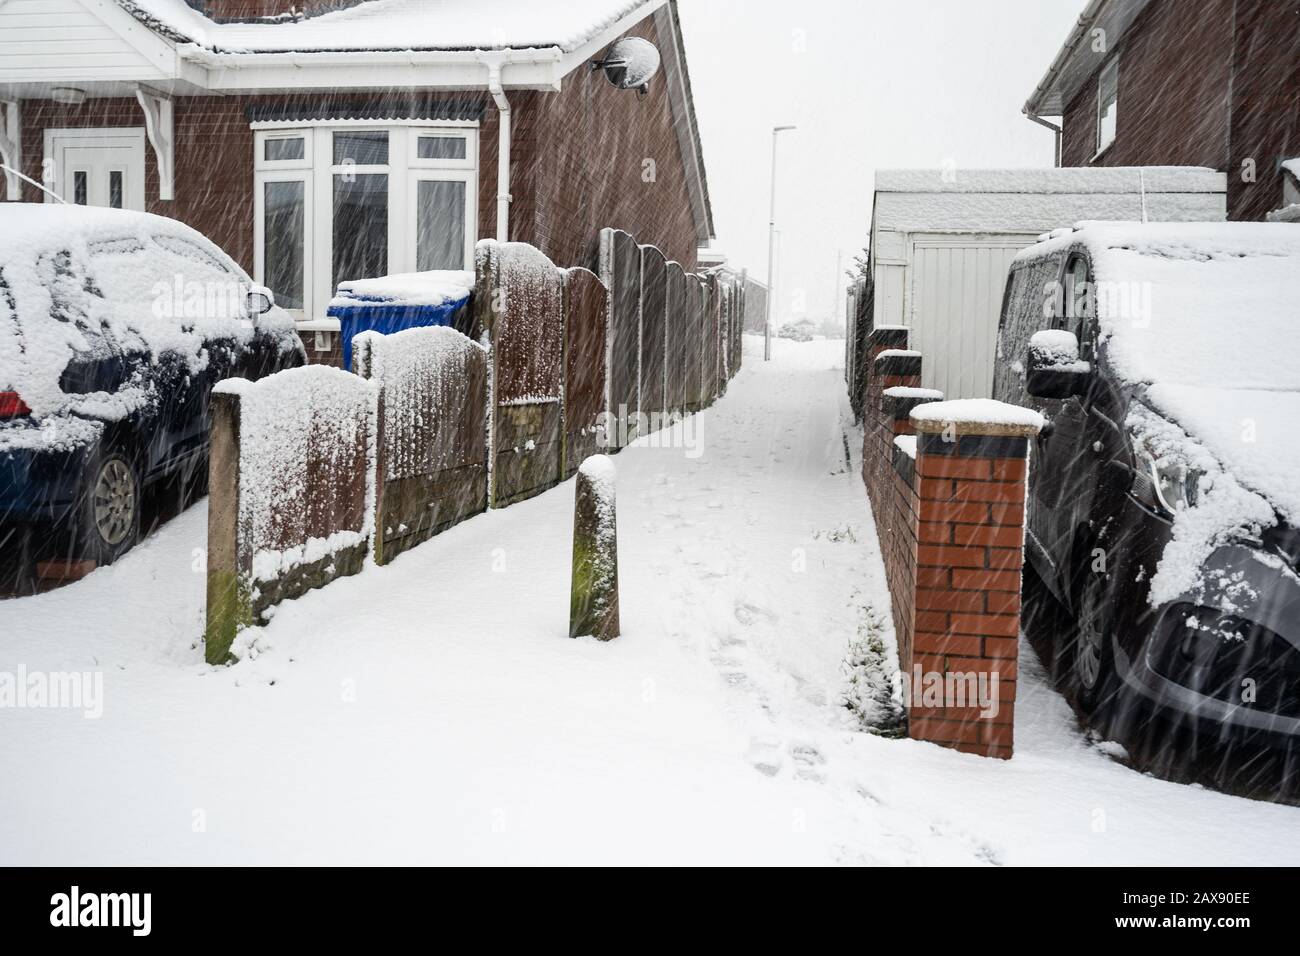 Heavy snow hits Stoke on Trent in the West Midlands after a storm suddenly appears, blanketing the city in ice and snow, snowy blizzard Stock Photo